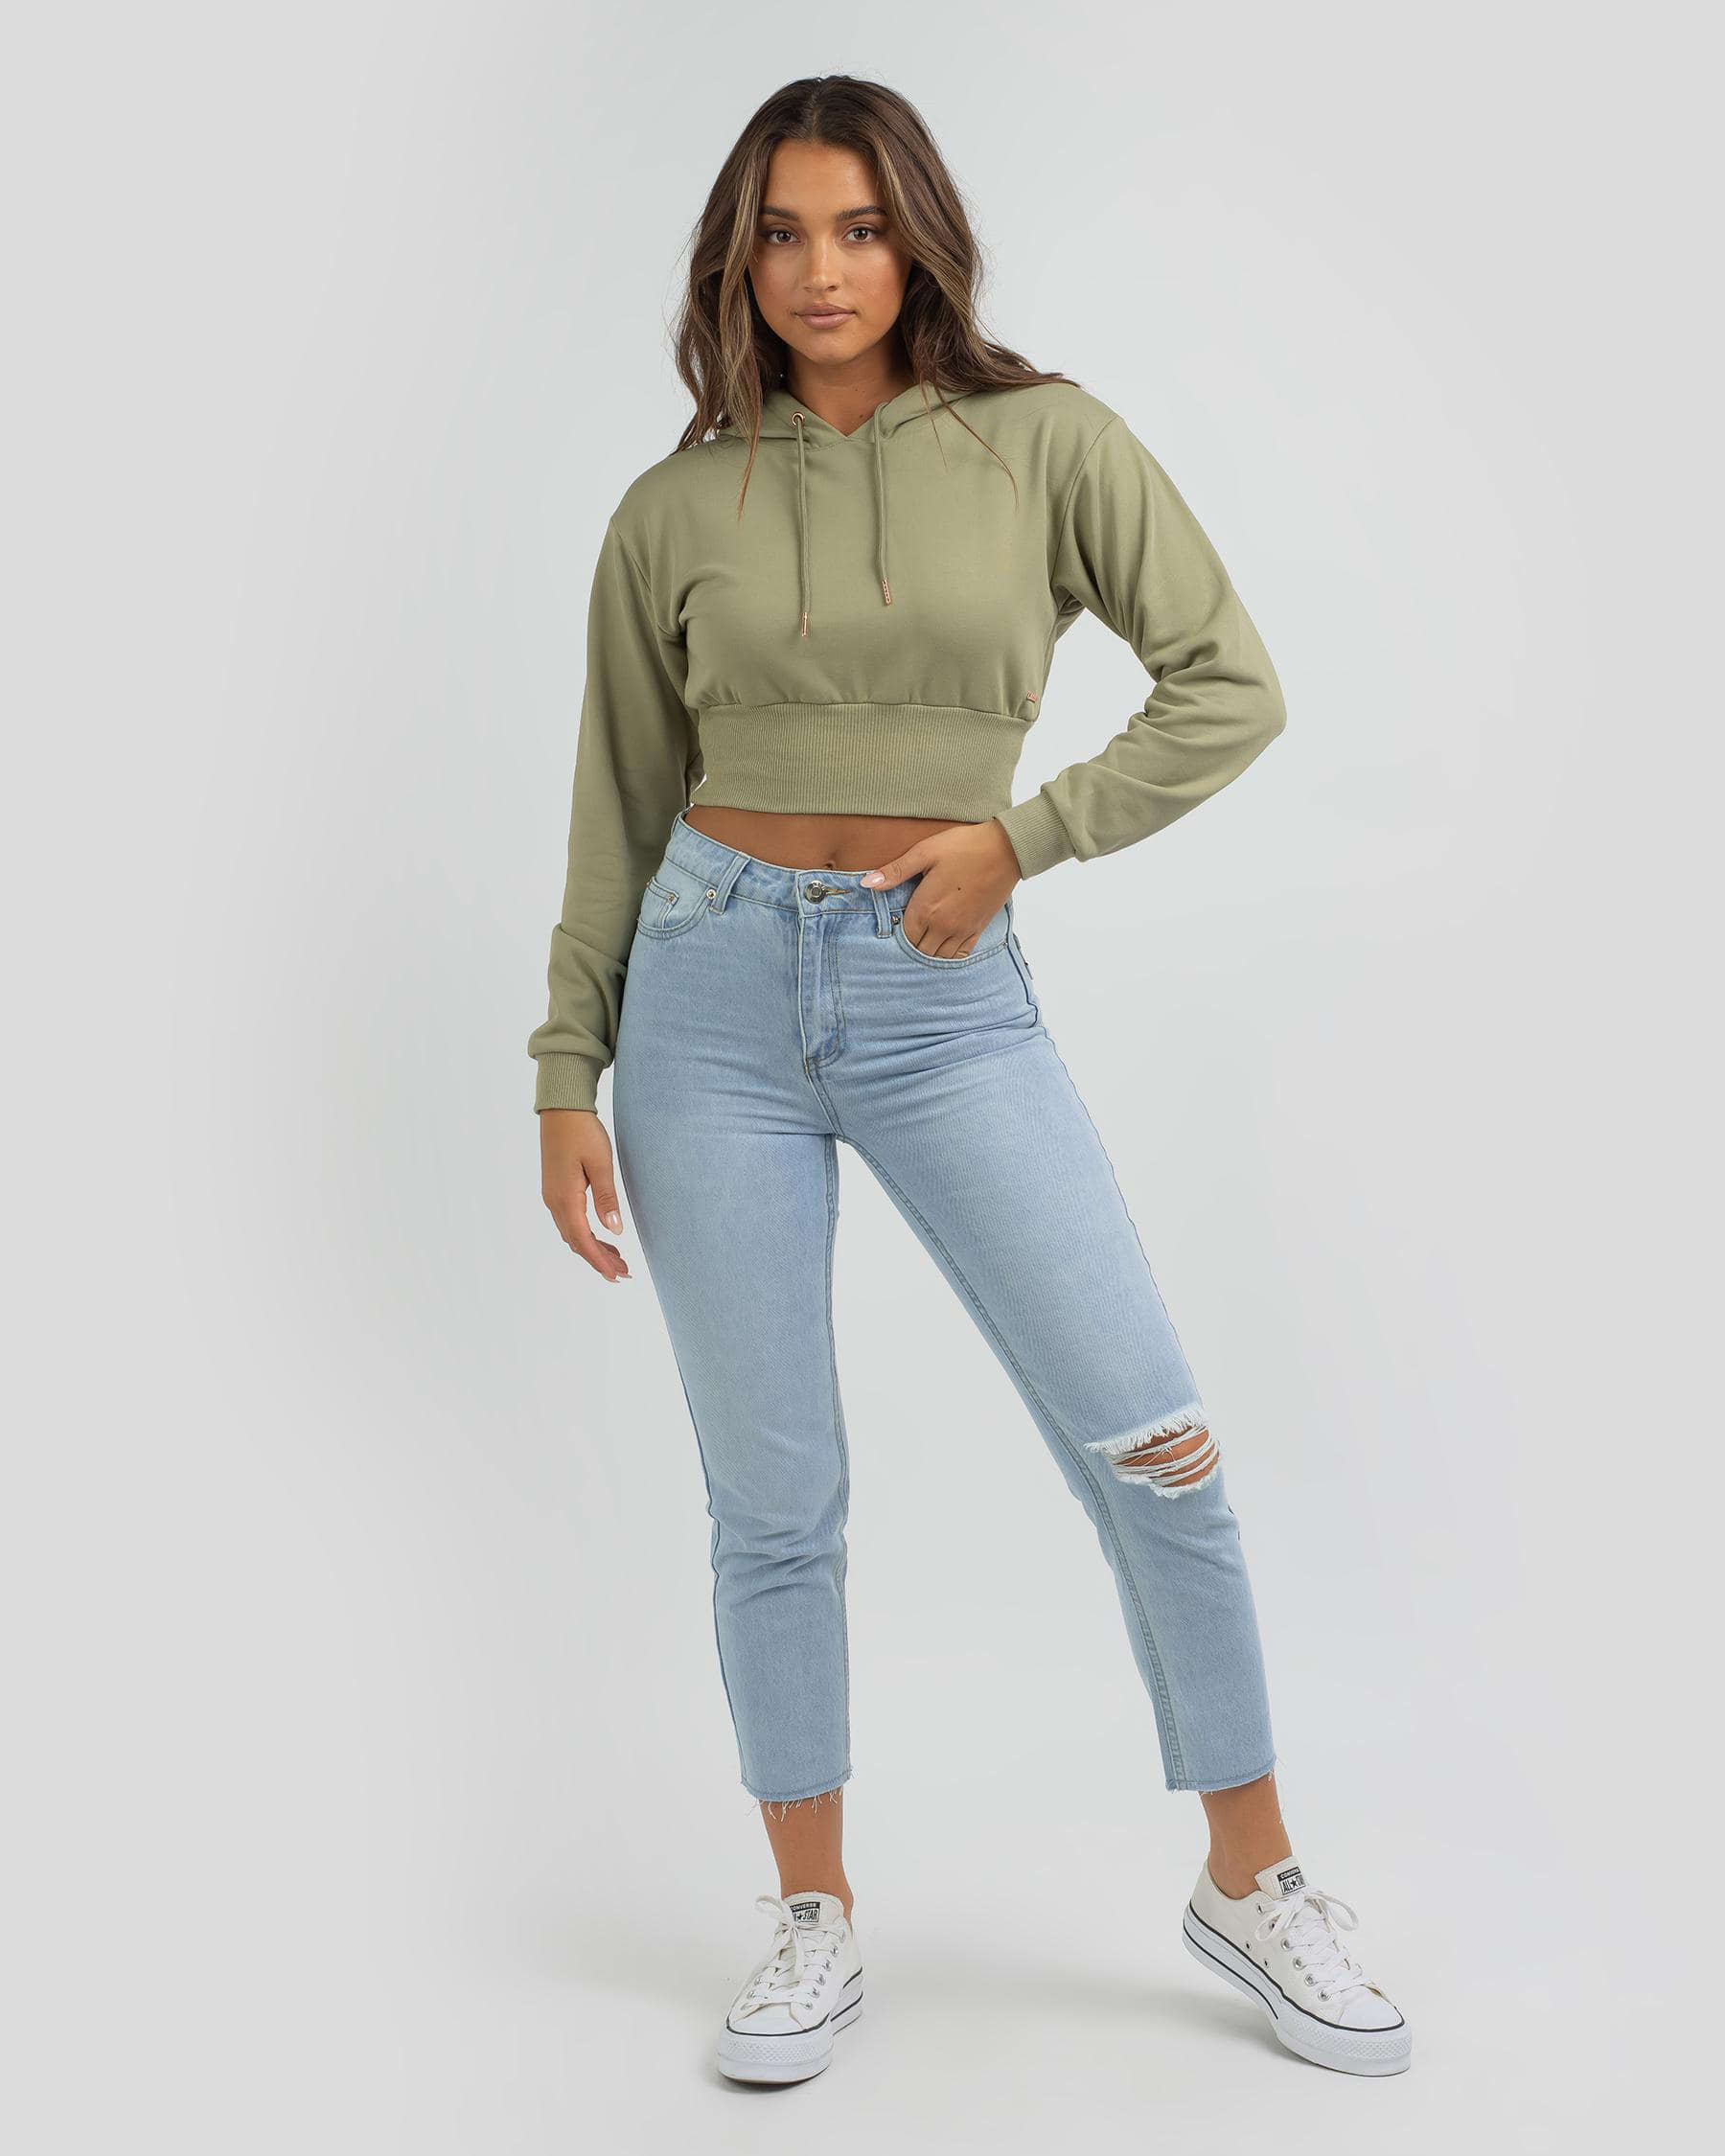 Ava And Ever Aaliyah Hoodie In Sage - Fast Shipping & Easy Returns ...